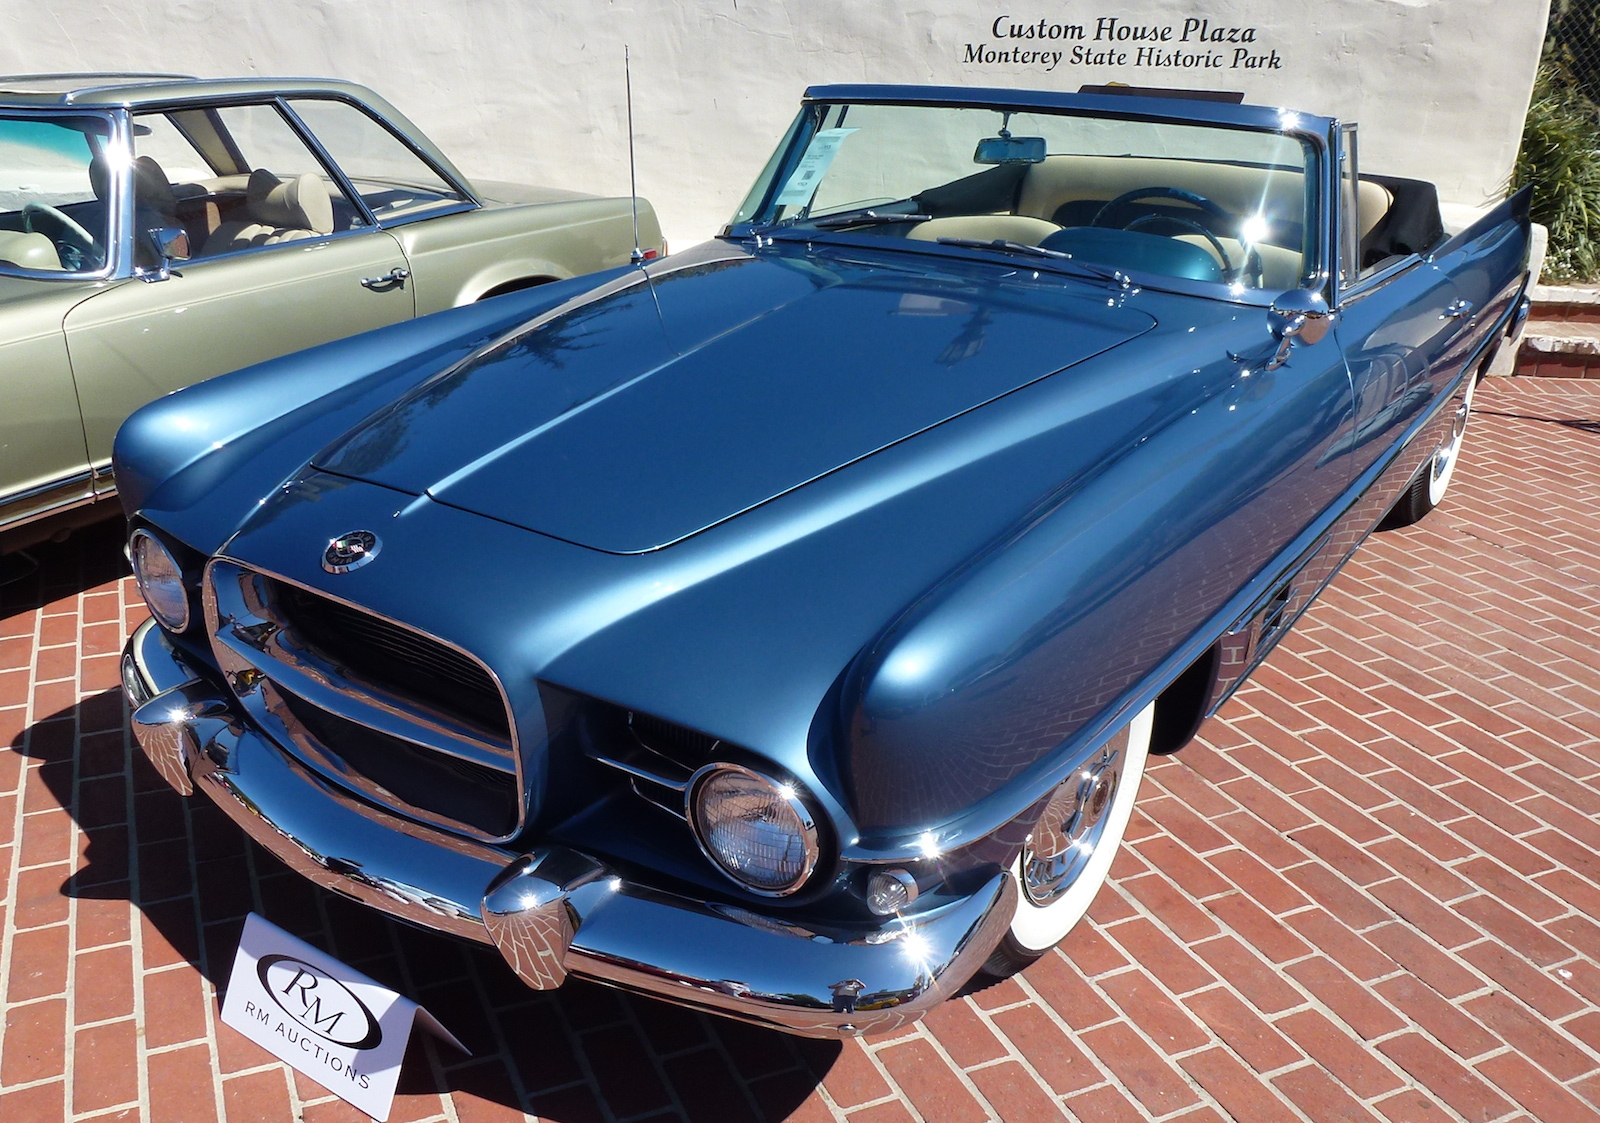 1957 Dual-Ghia Convertible - The First One?